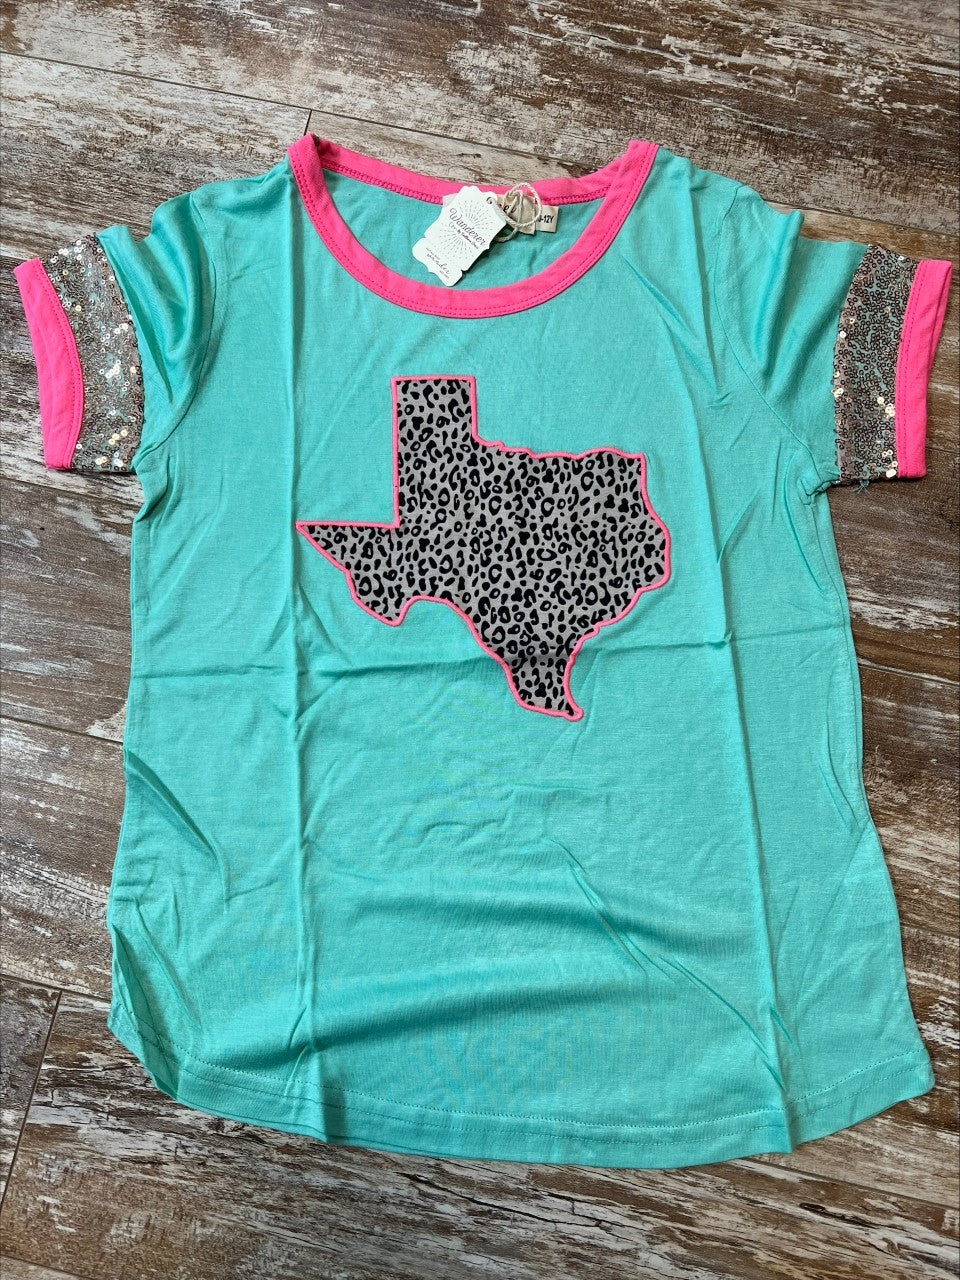 Girls Wanderer Teal and Pink Tshirt with Leopard Texas by Southern Grace